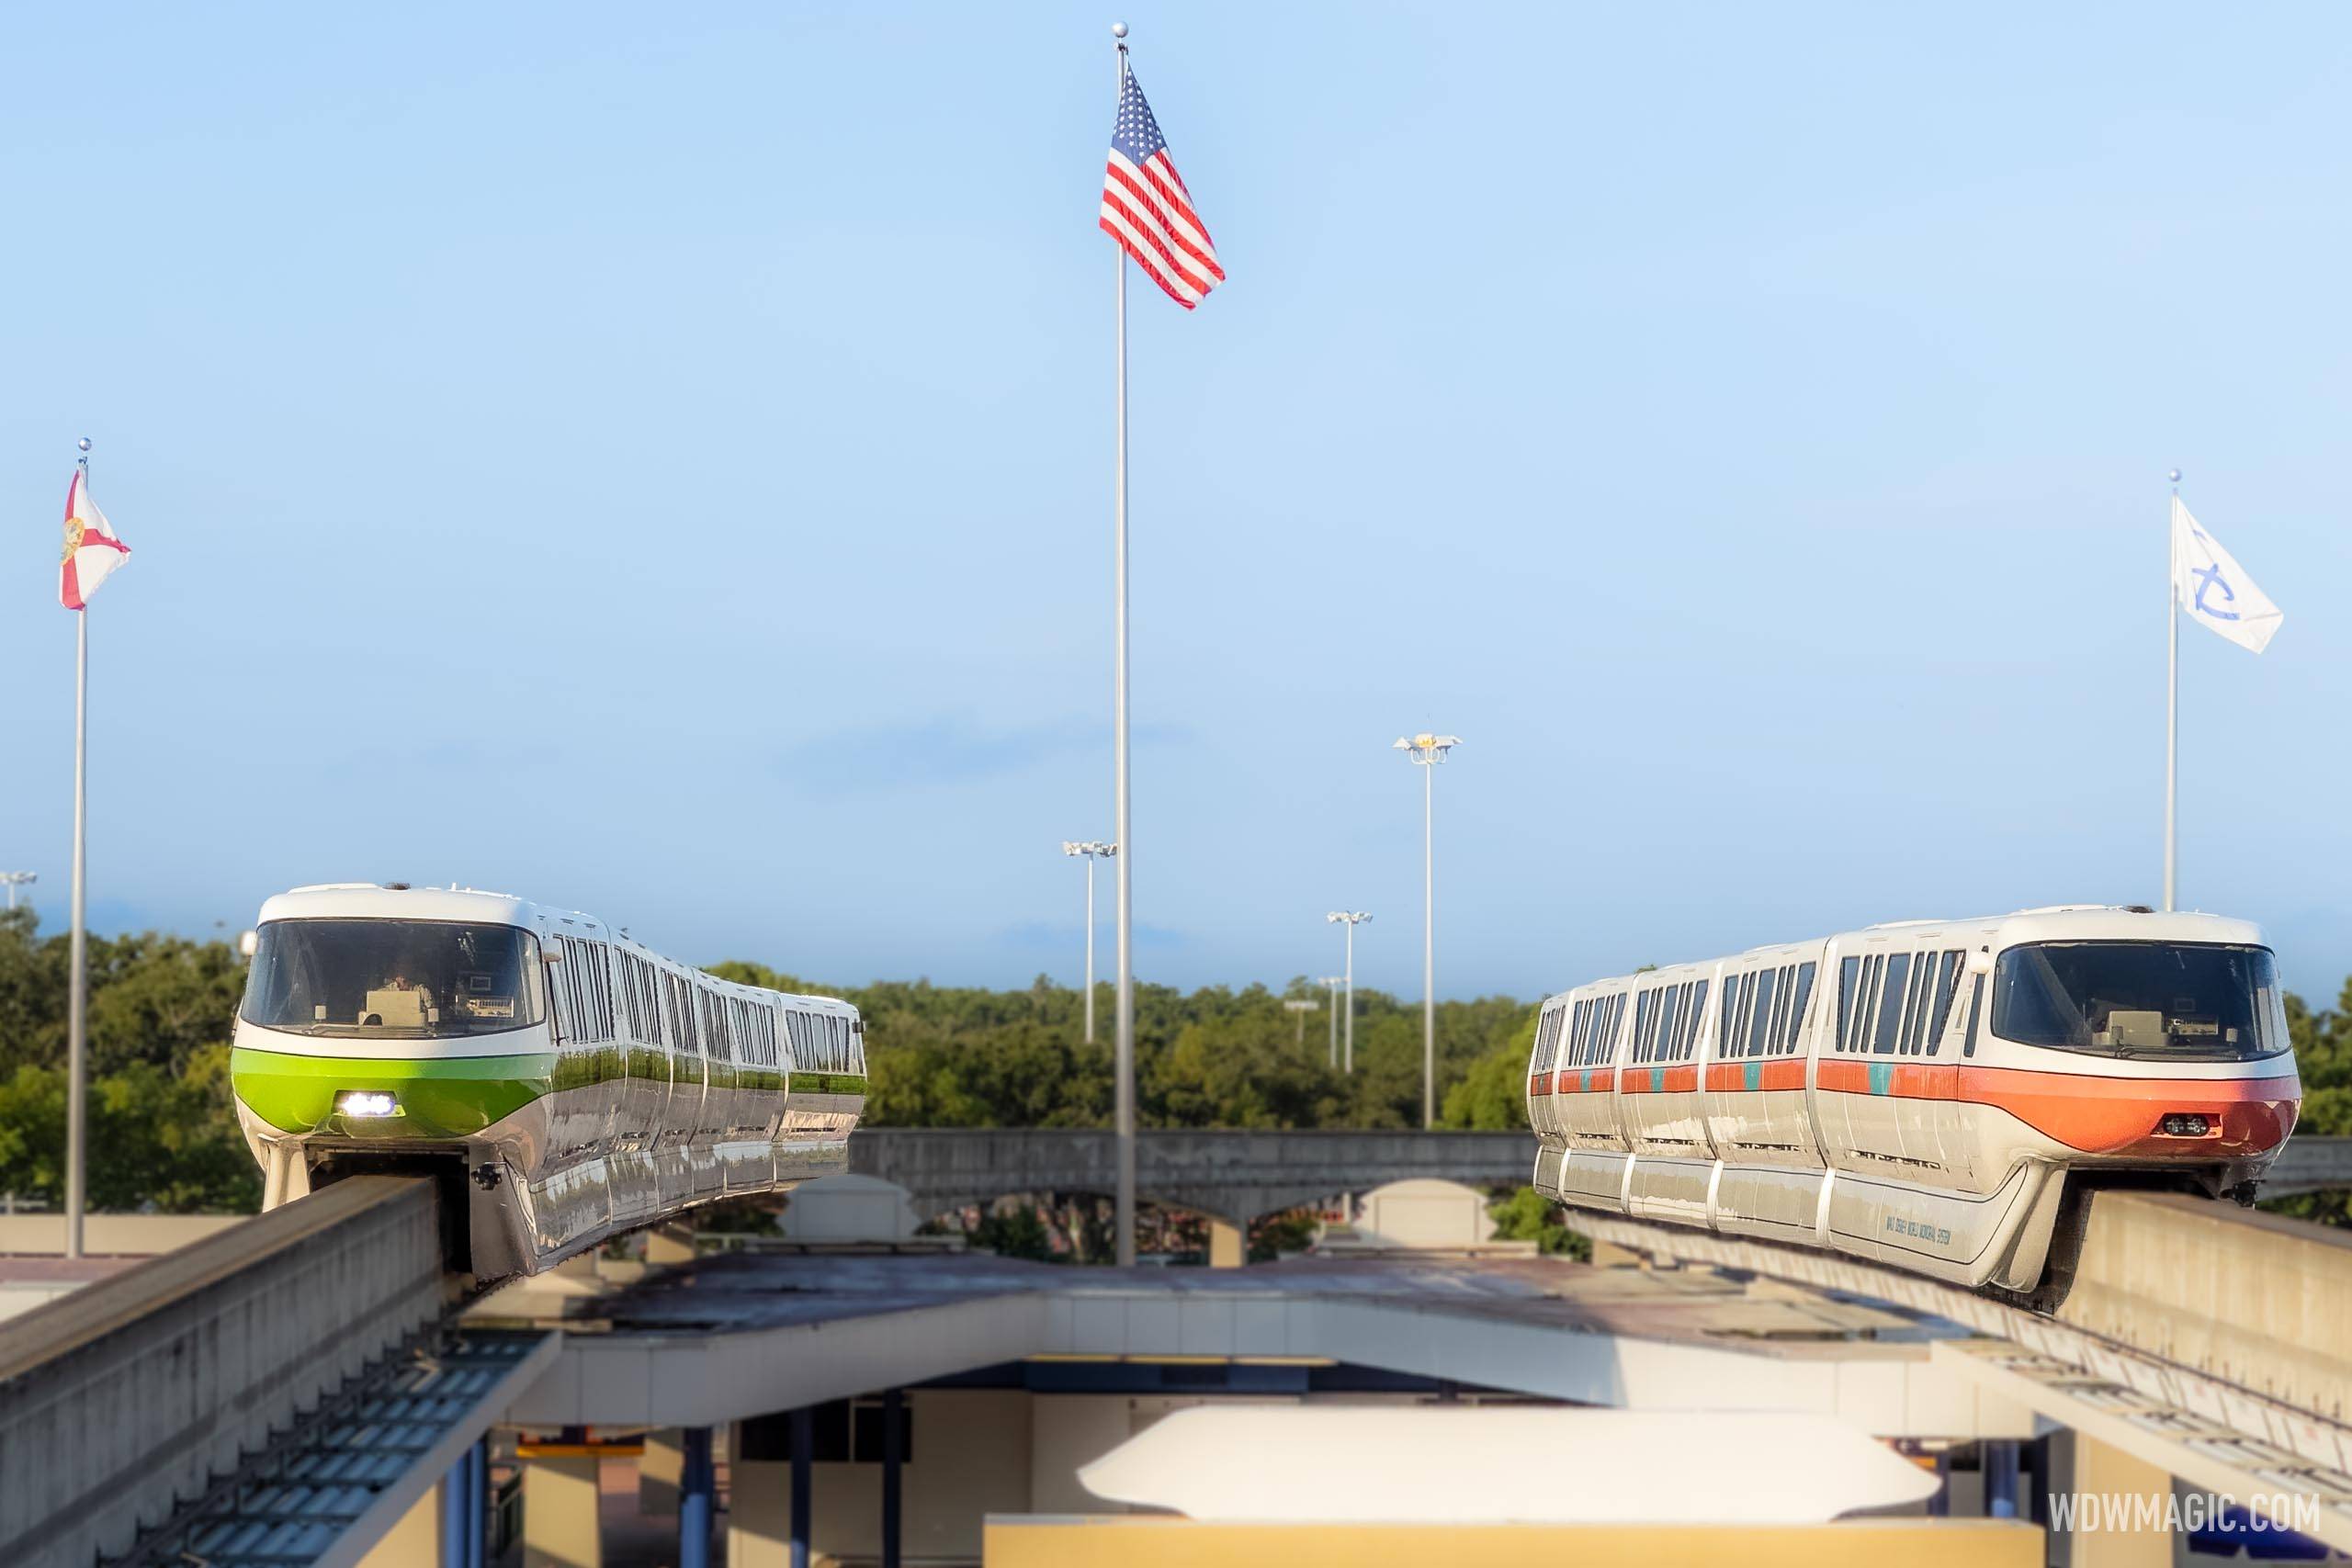 Disney has previously been responsible for inspecting its own monorail system at Walt Disney World